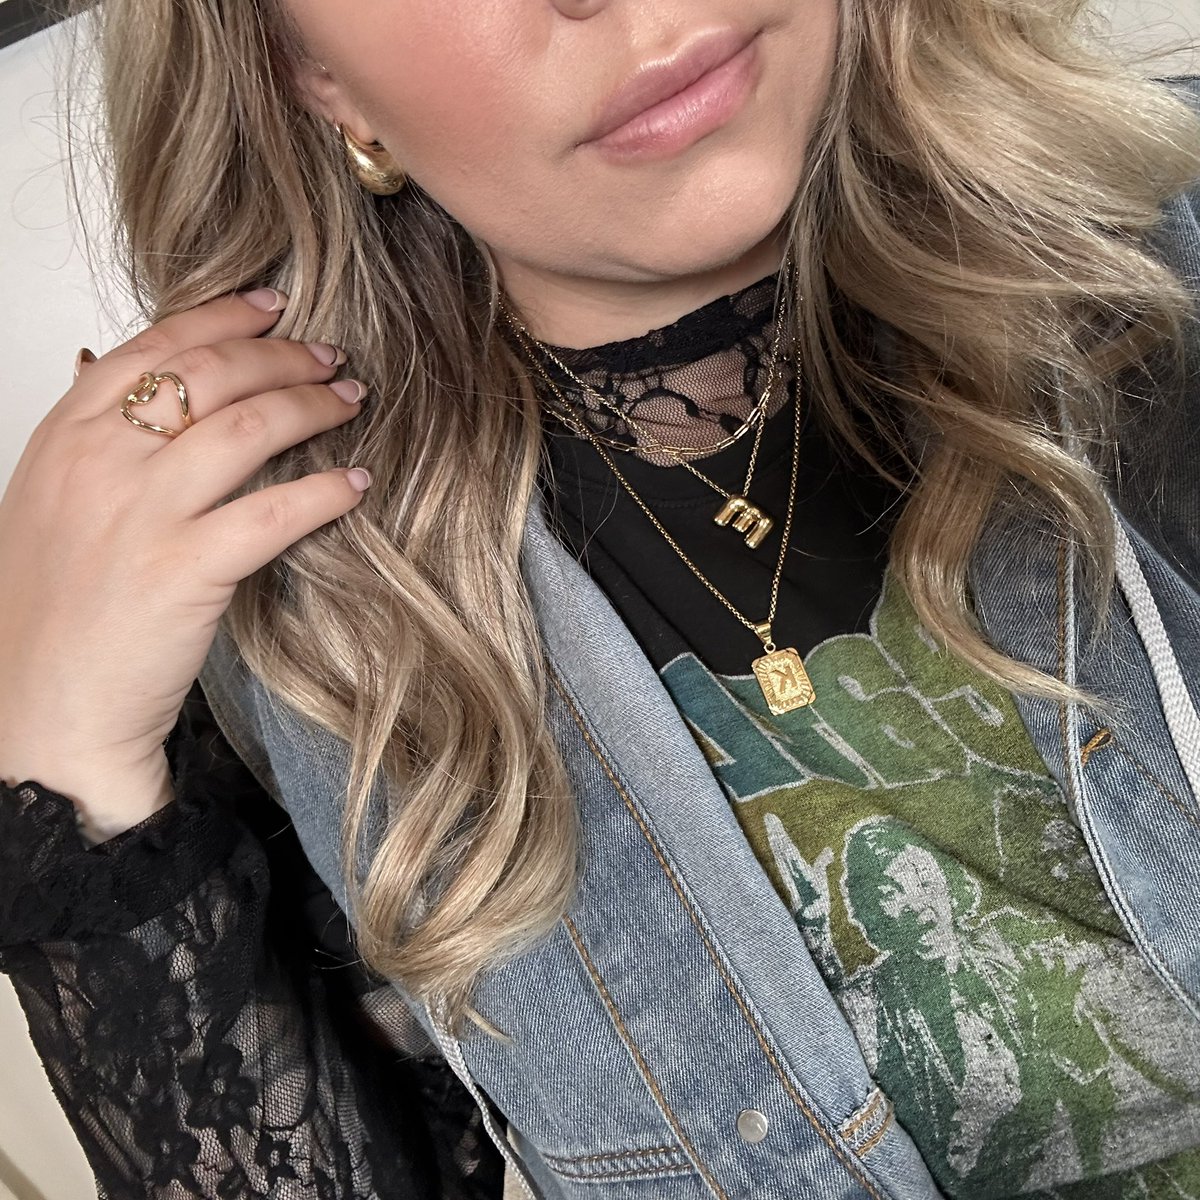 KailLowry tweet picture